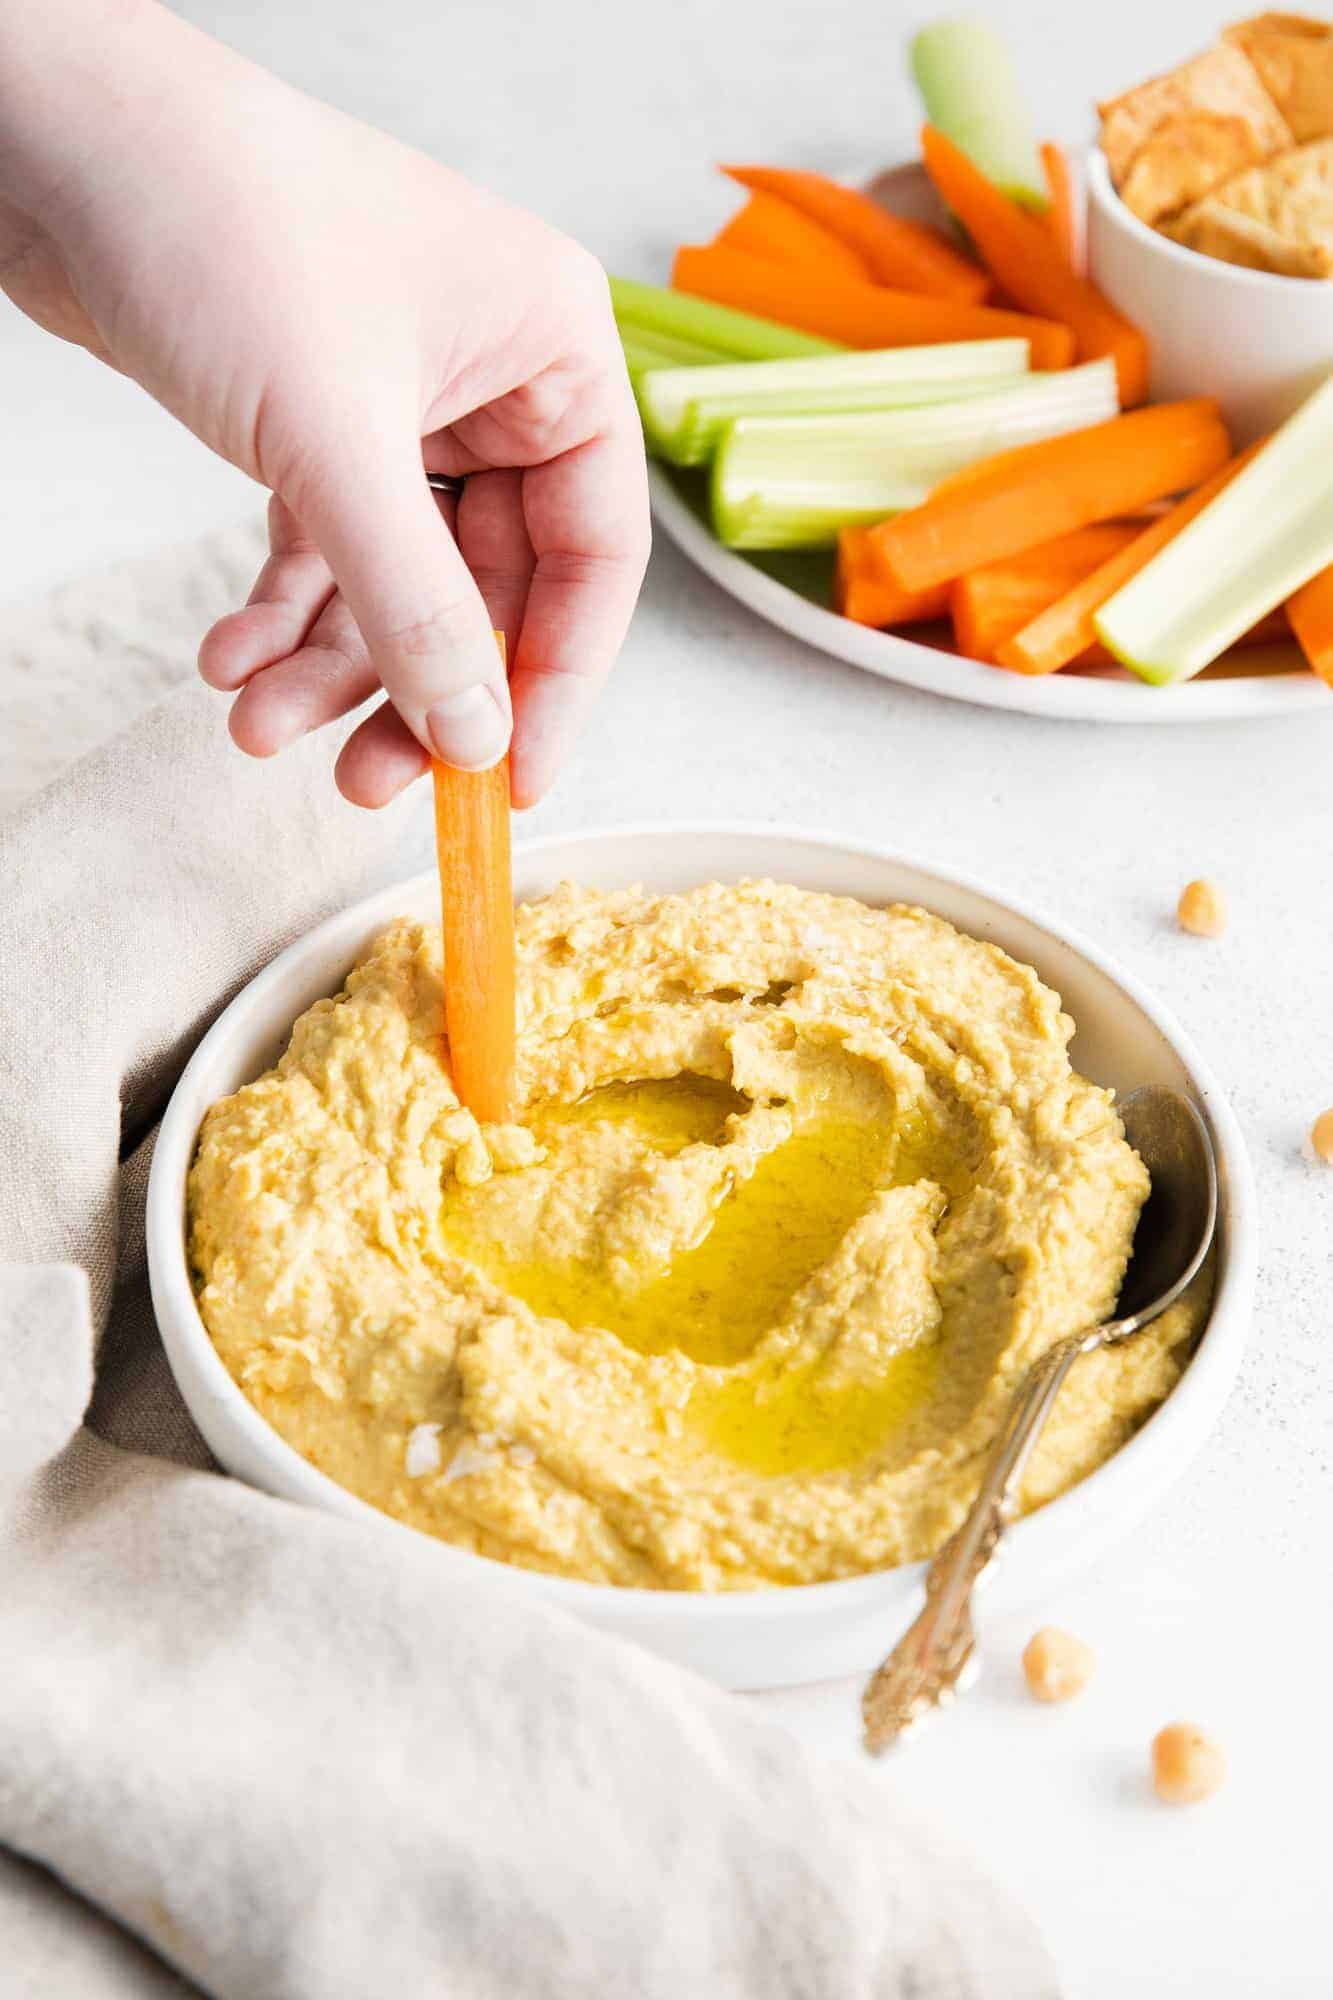 Hand dipping a carrot stick in a bowl of hummus.